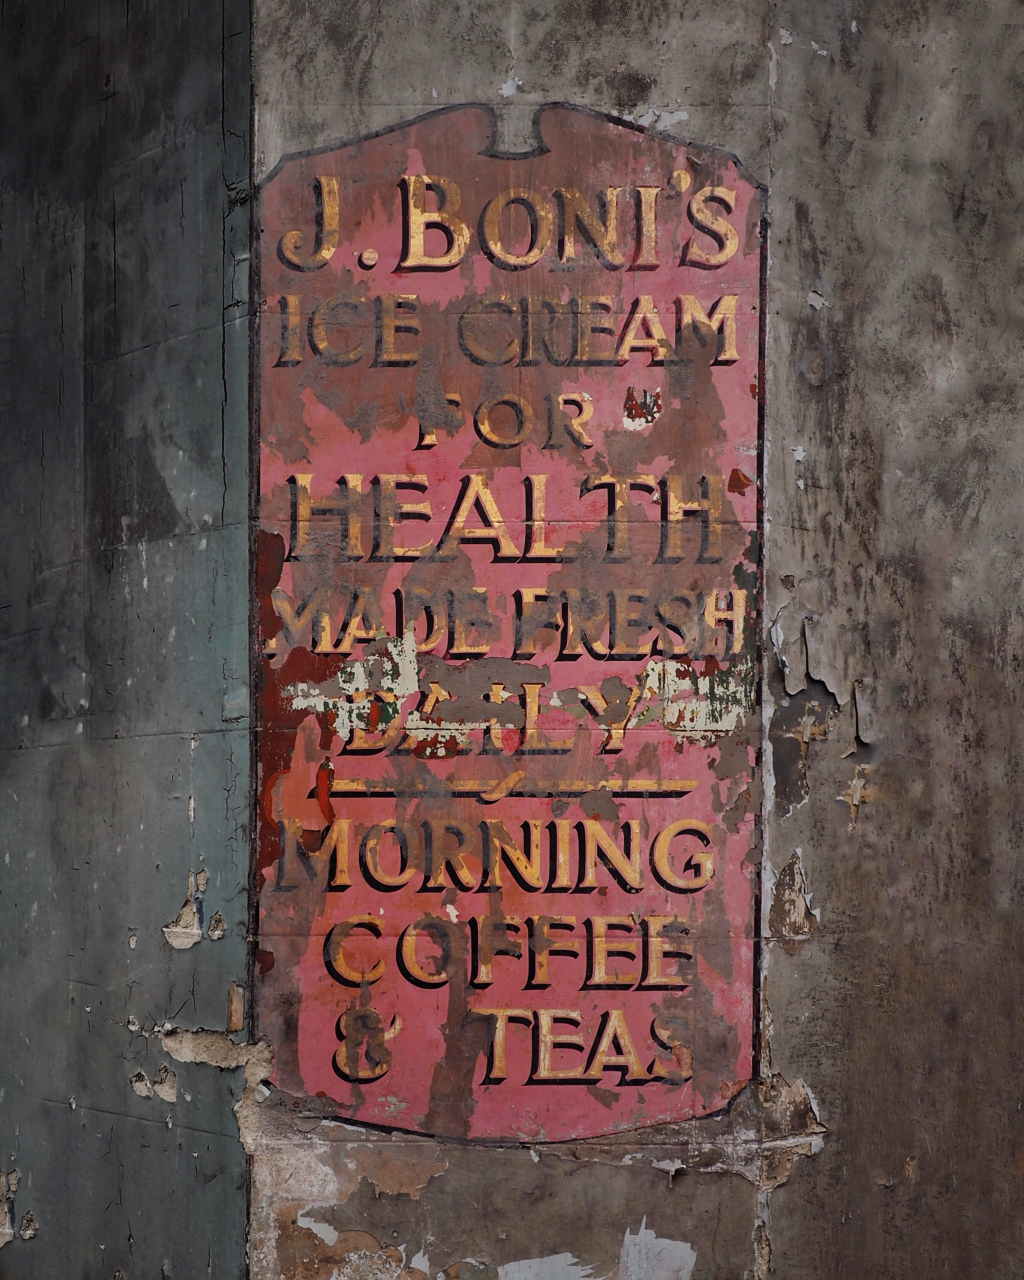 Fading painted sign promoting J. Boni's Ice Cream "for health".